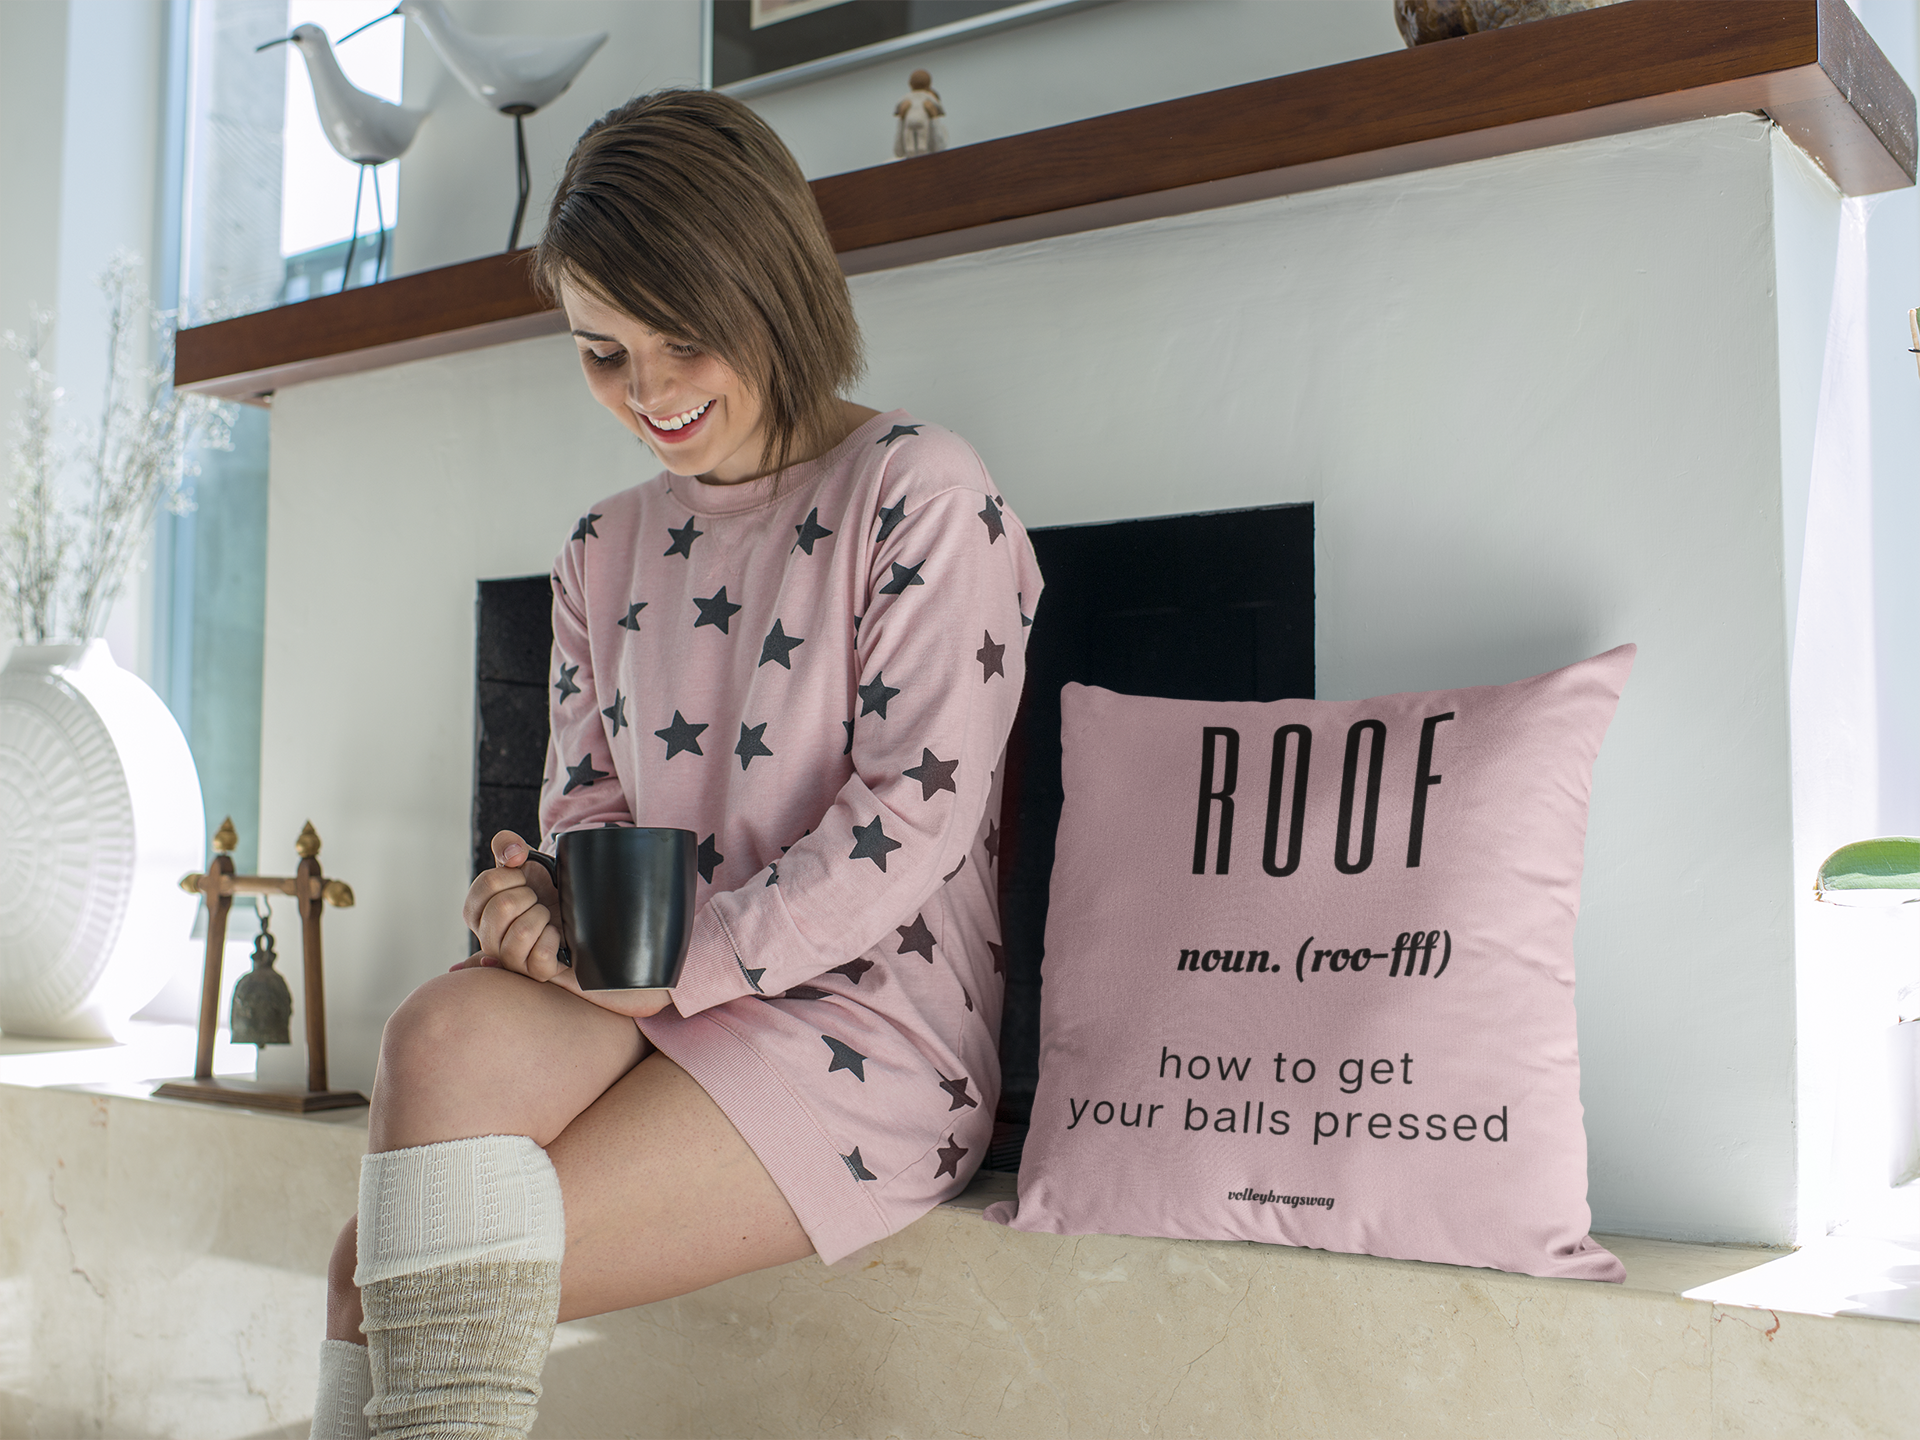 ROOF (noun) How To Get Your Balls Pressed volleyball pillow. April Chapple, Launches a Hilarious Volleyball Pillow Line With Fun Tongue-in-Cheek Designs sure to make players laugh.